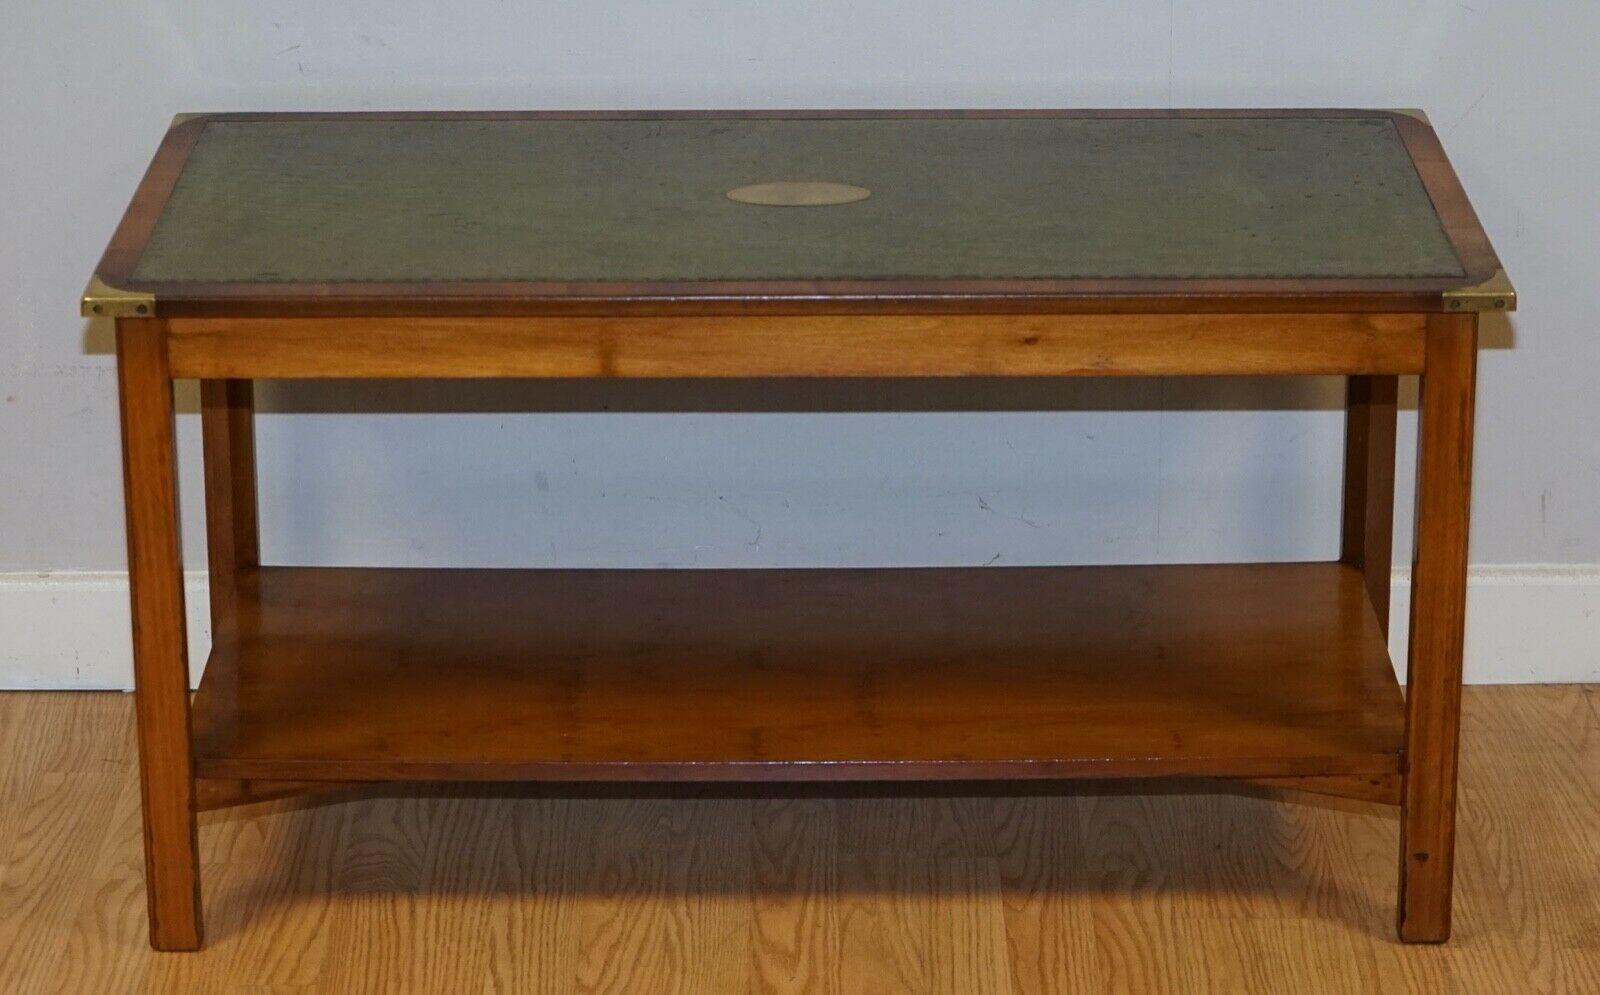 Bevan Funnell Military Campaign Yew Wood Green Leather Top Coffee Table 2